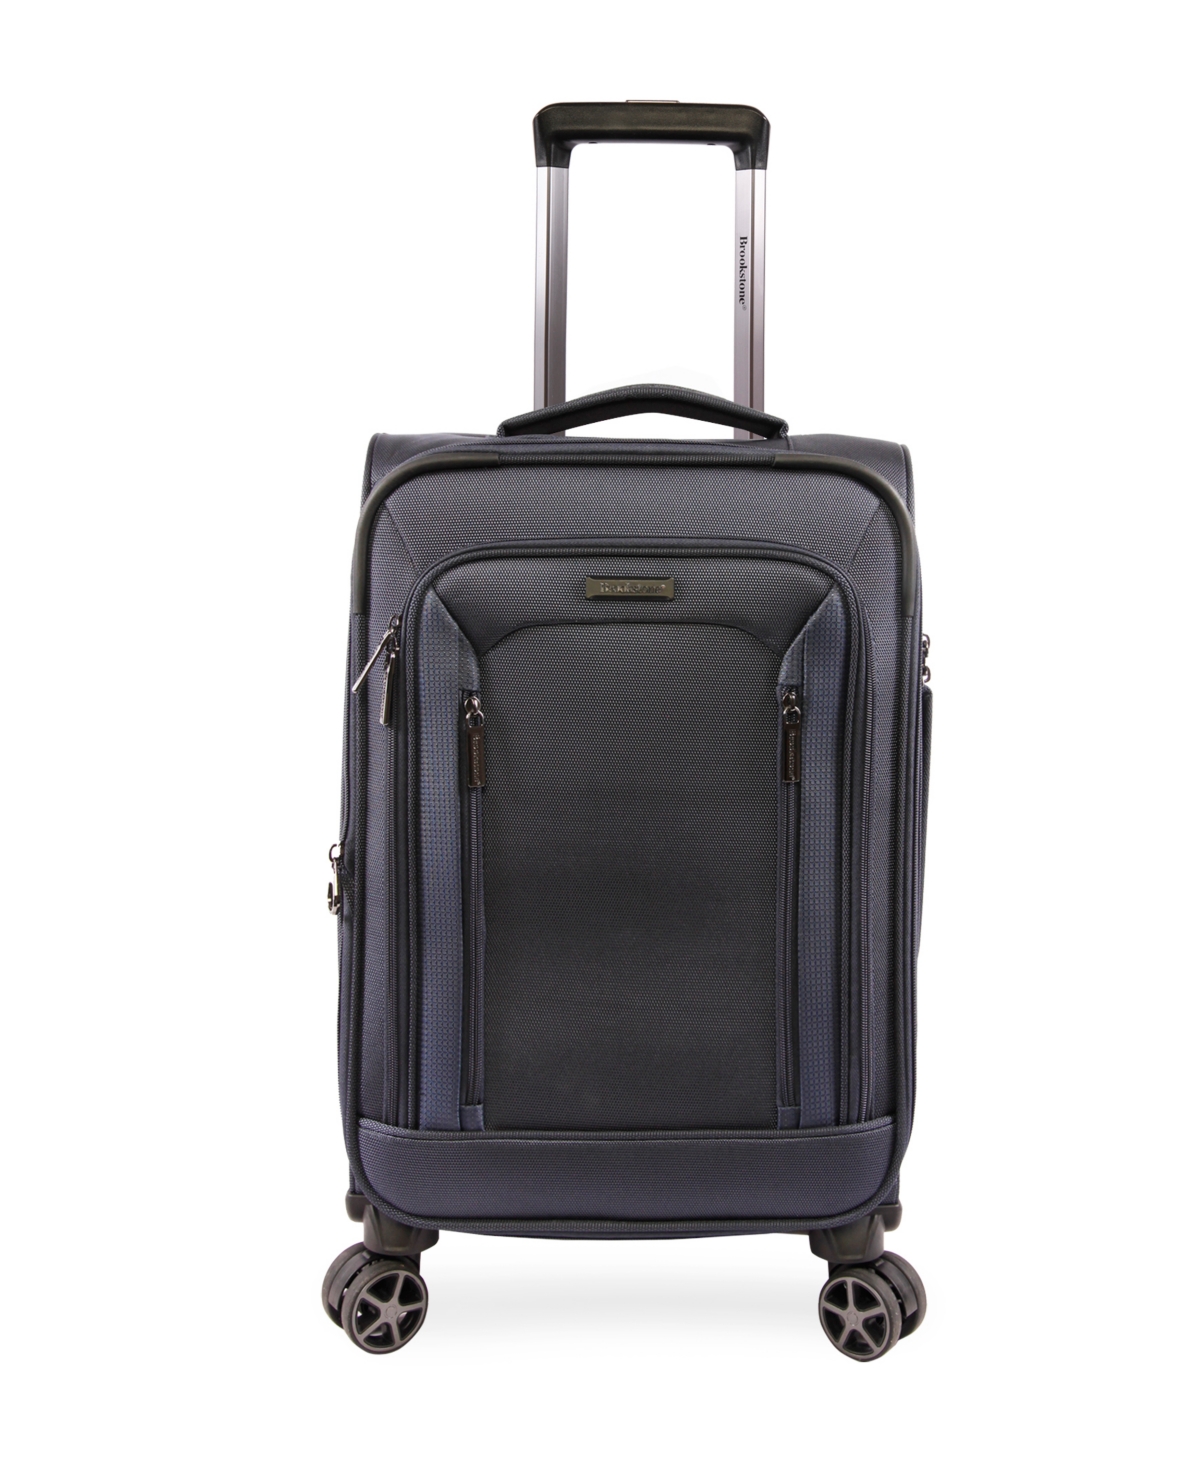 Elswood 21" Softside Carry-On Luggage with Charging Port - Charcoal